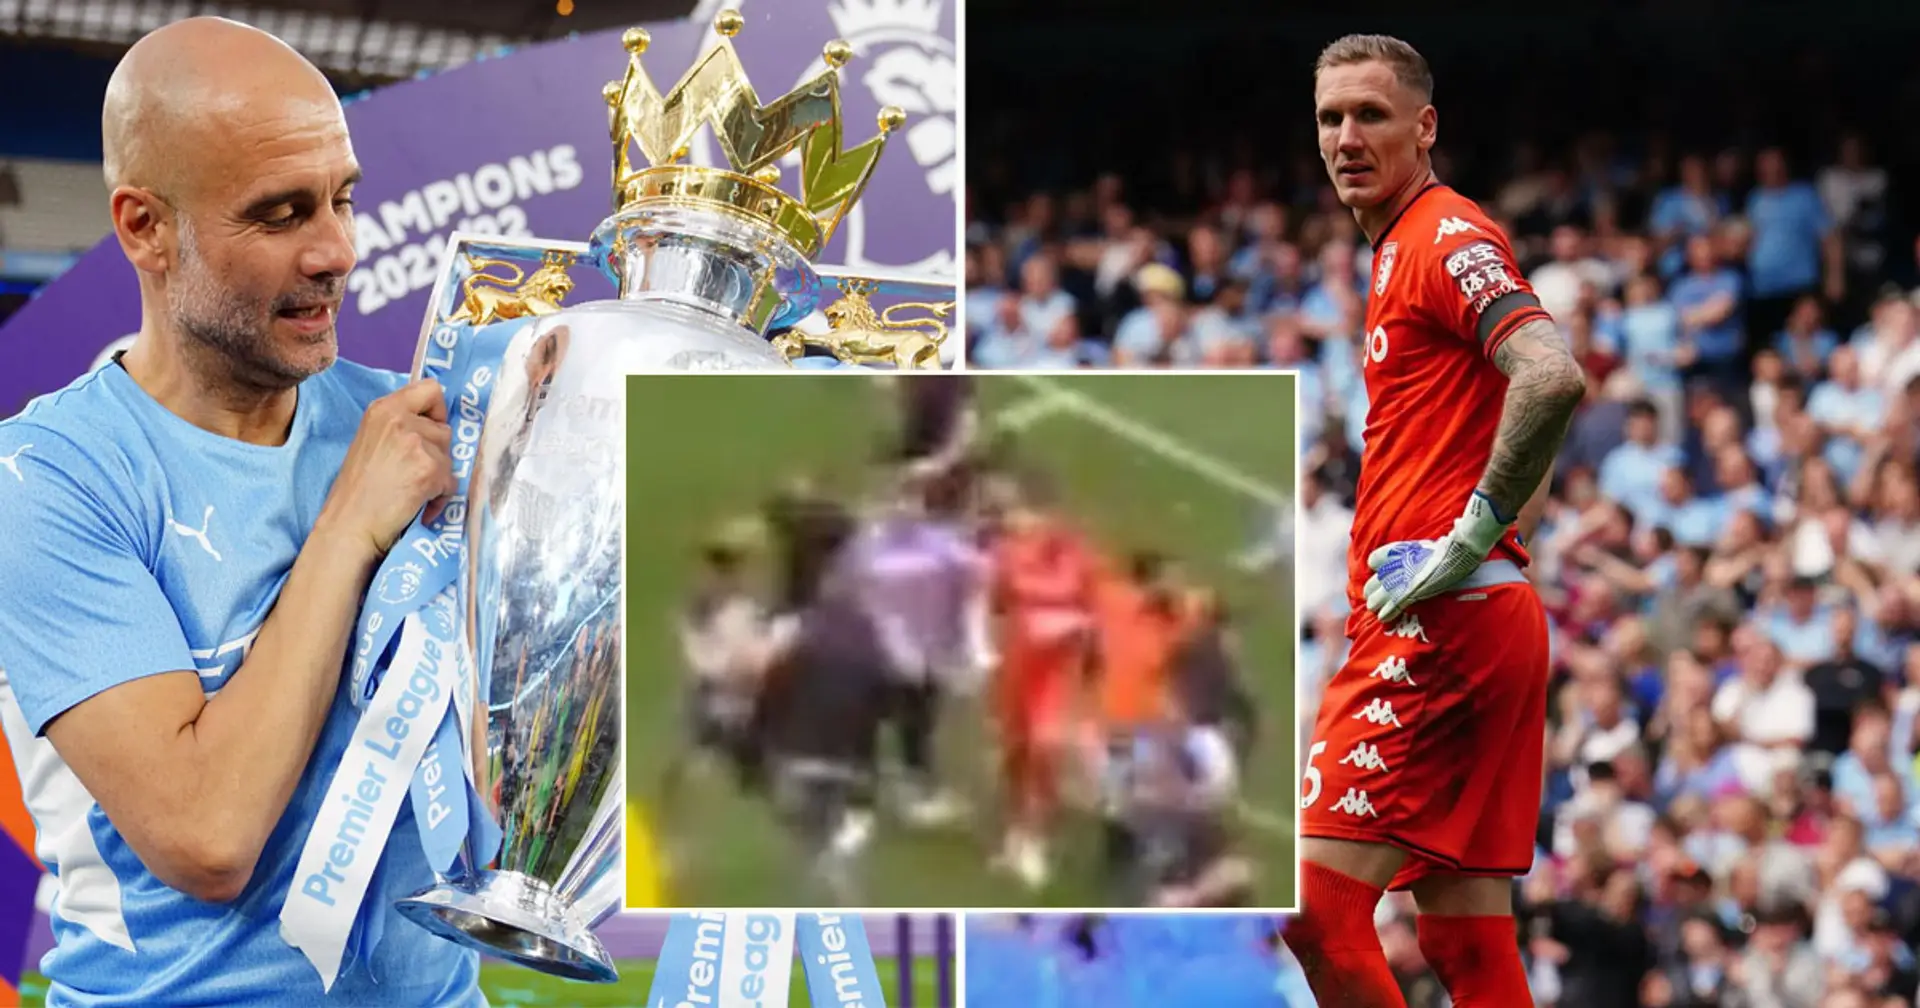 Aston Villa goalkeeper attacked by Man City fans after Premier League title decider - City respond